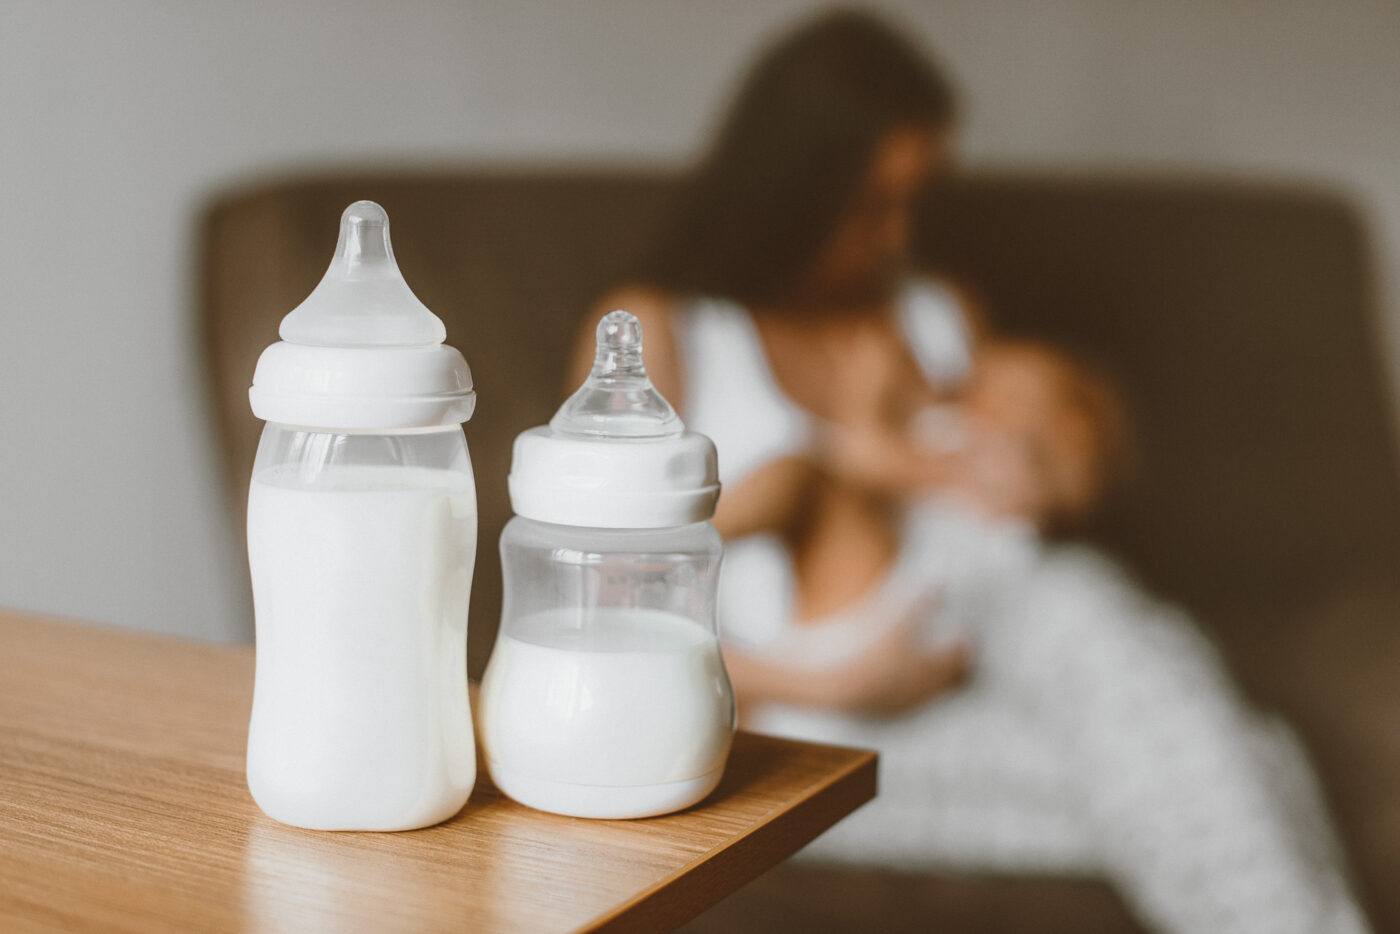 If you are a breastfeeding mom who plans to go back to work following your maternity leave, it is important to practice using bottles beginning around 3-4 weeks old. Selecting a bottle with the appropriate flow will also be important to help maintain the breastfeeding relationship.